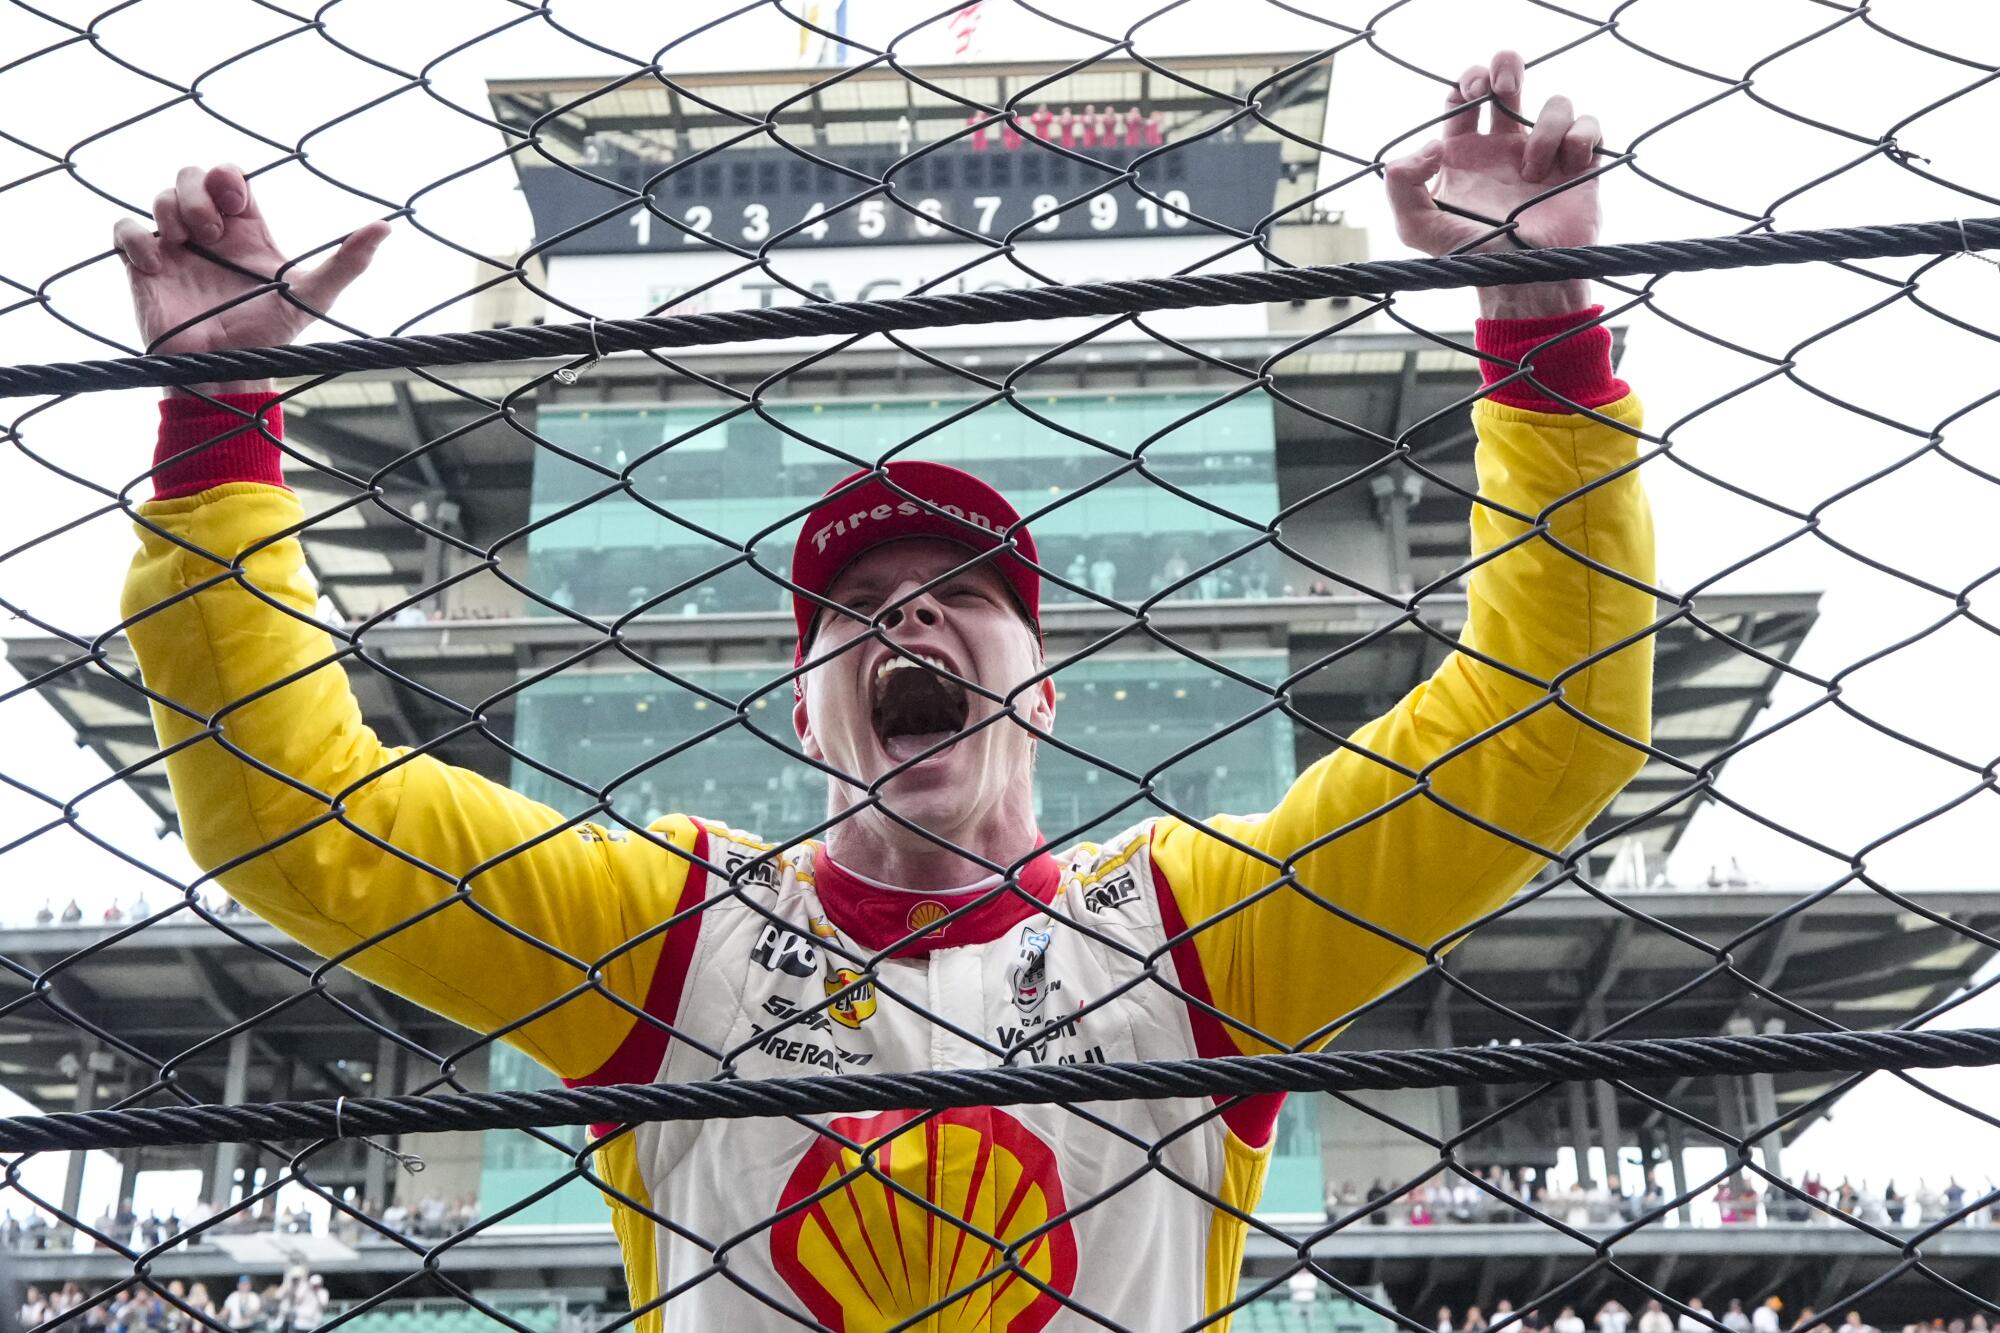 Josef Newgarden celebrates after winning the Indianapolis 500 at the Indianapolis Motor Speedway on Sunday.